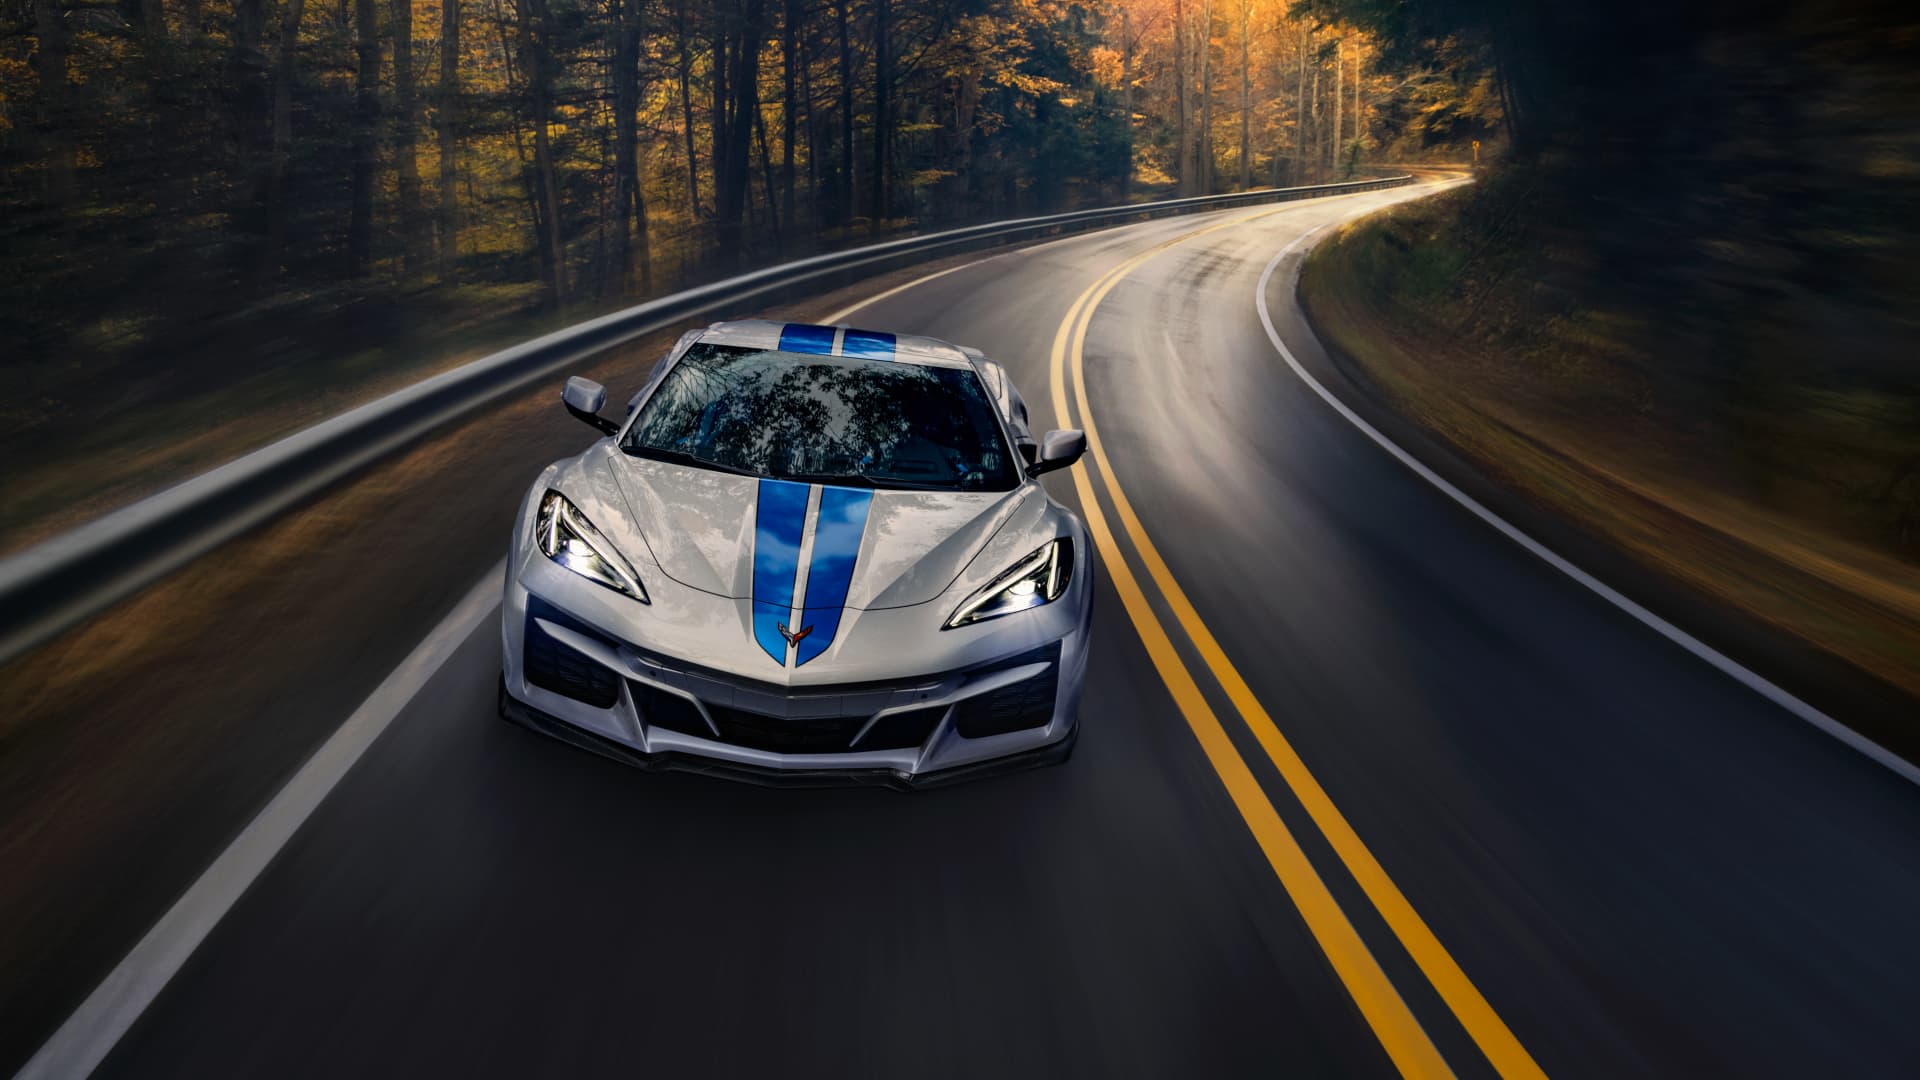 GM reveals new Chevy Corvette E-Ray hybrid sports car, starting at over $104,000 Auto Recent